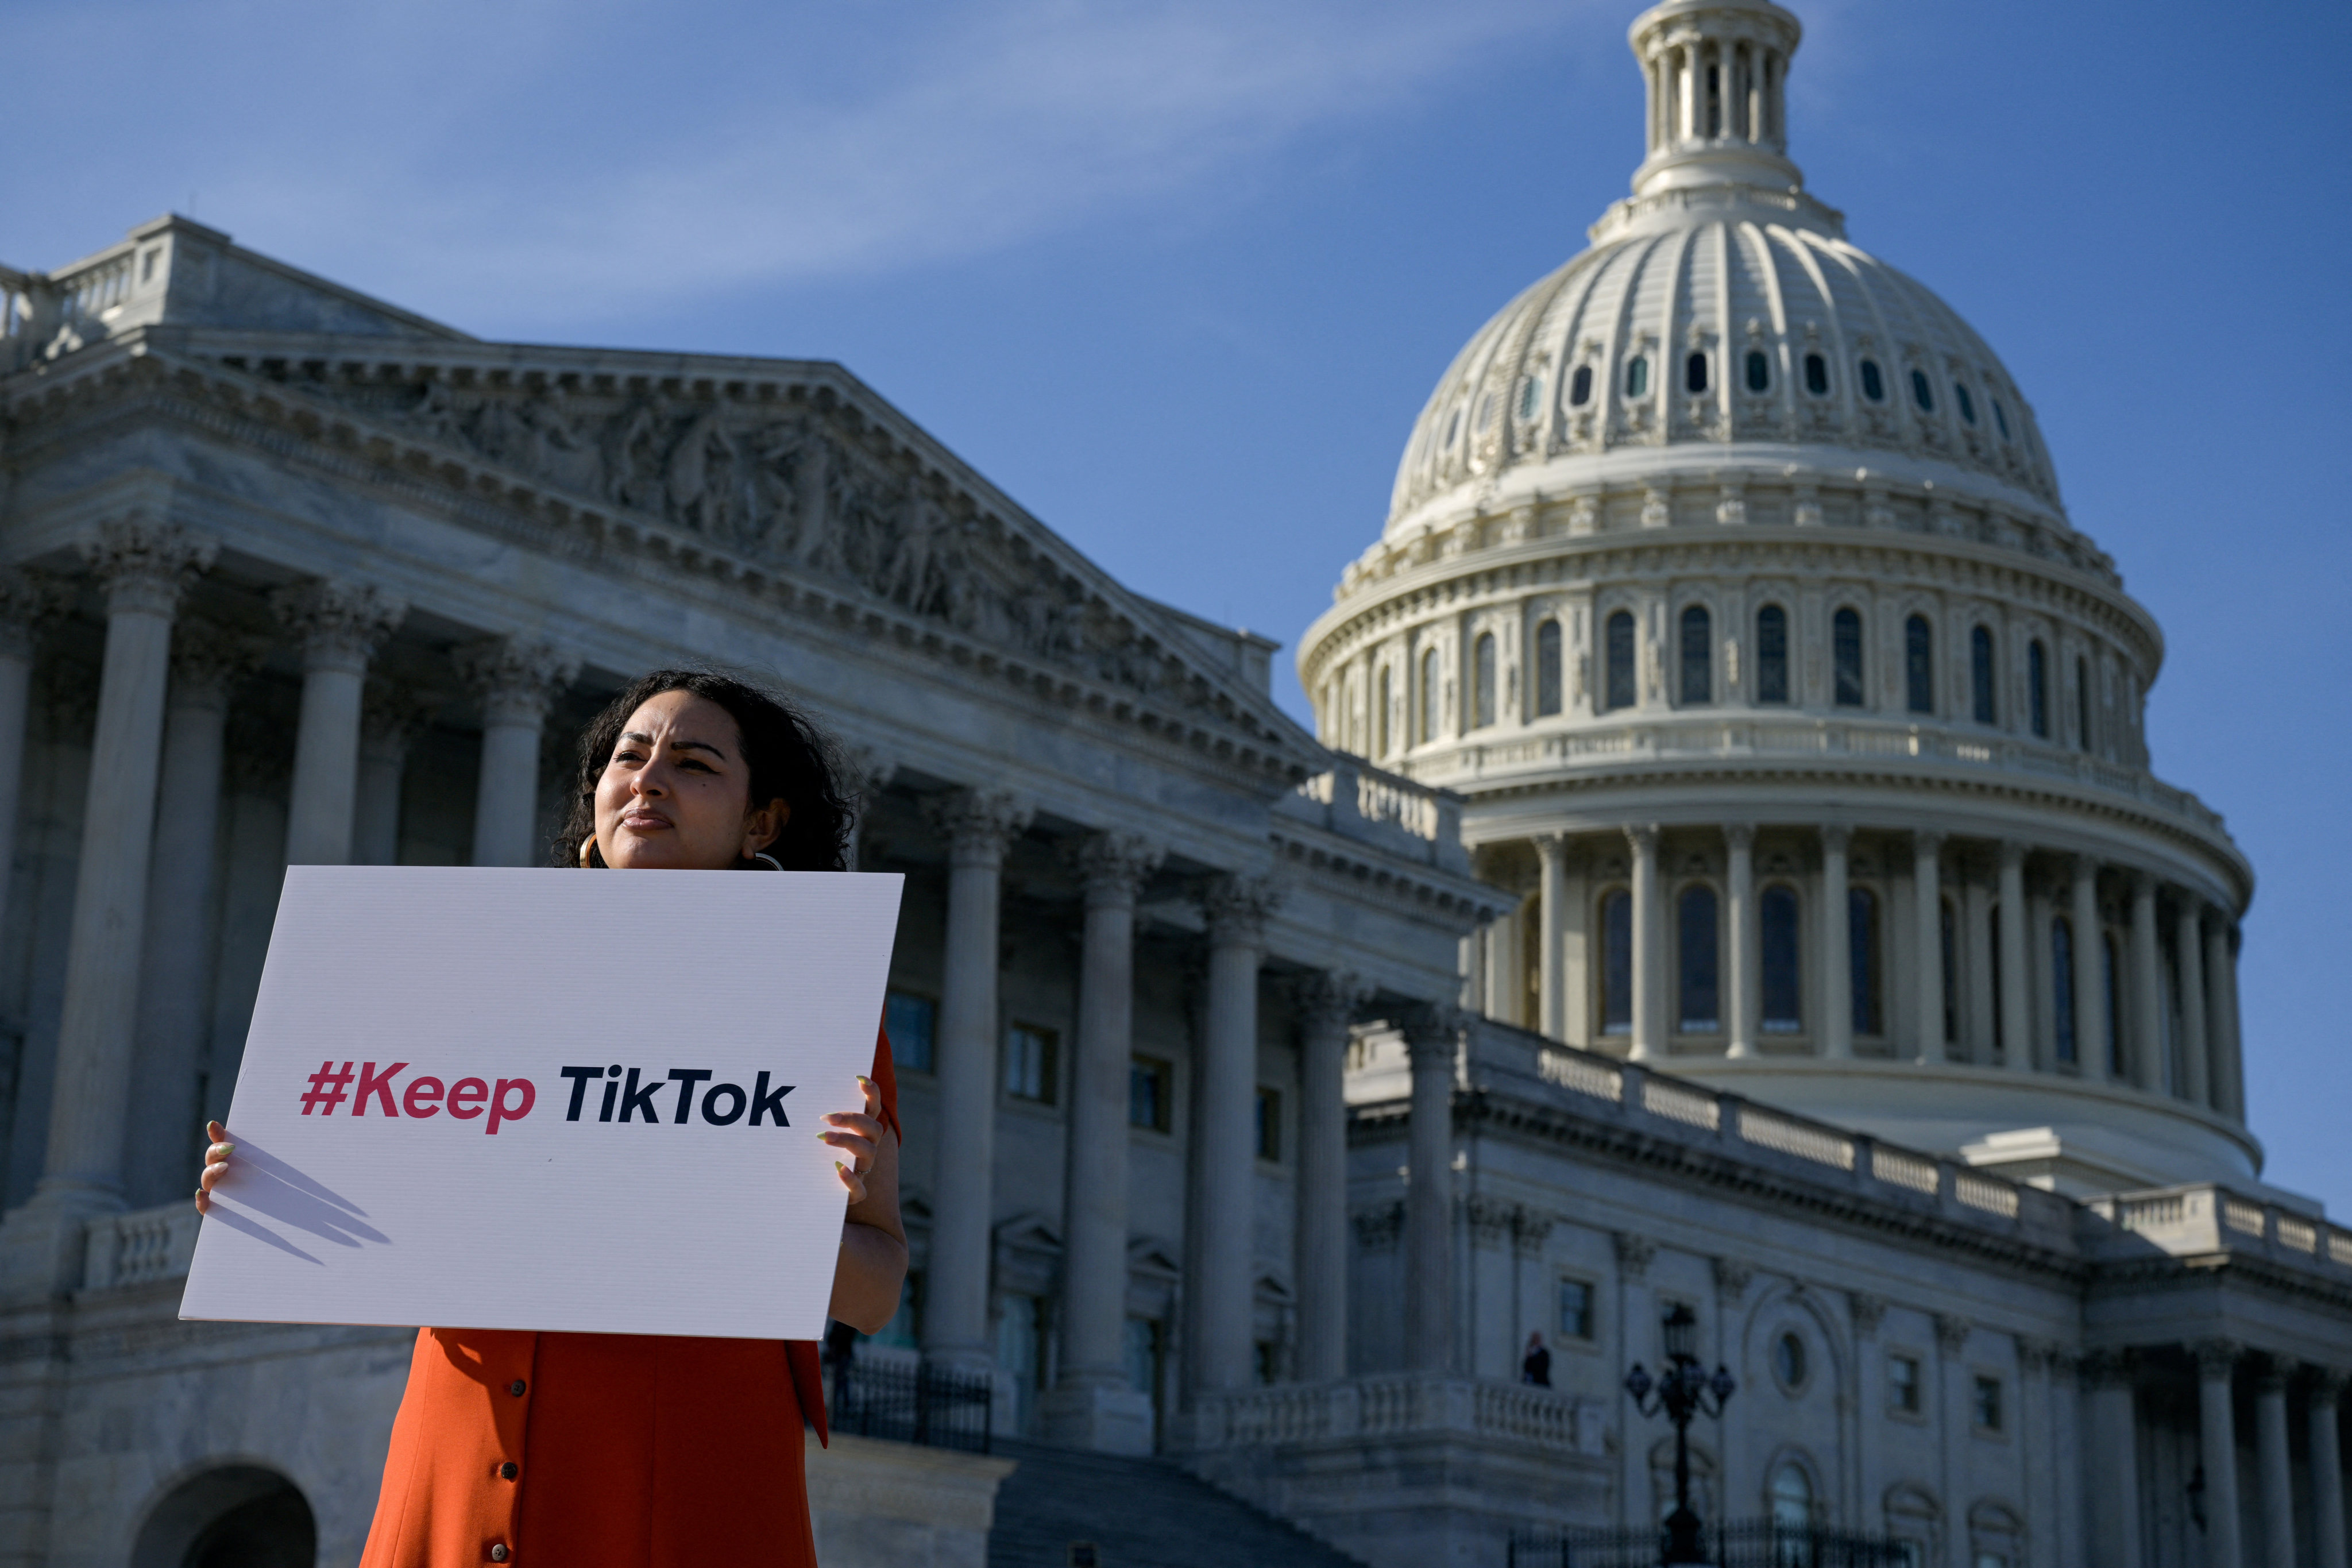 A TikTok creator protests outside the US Capitol in Washington on March 12. Photo: Reuters